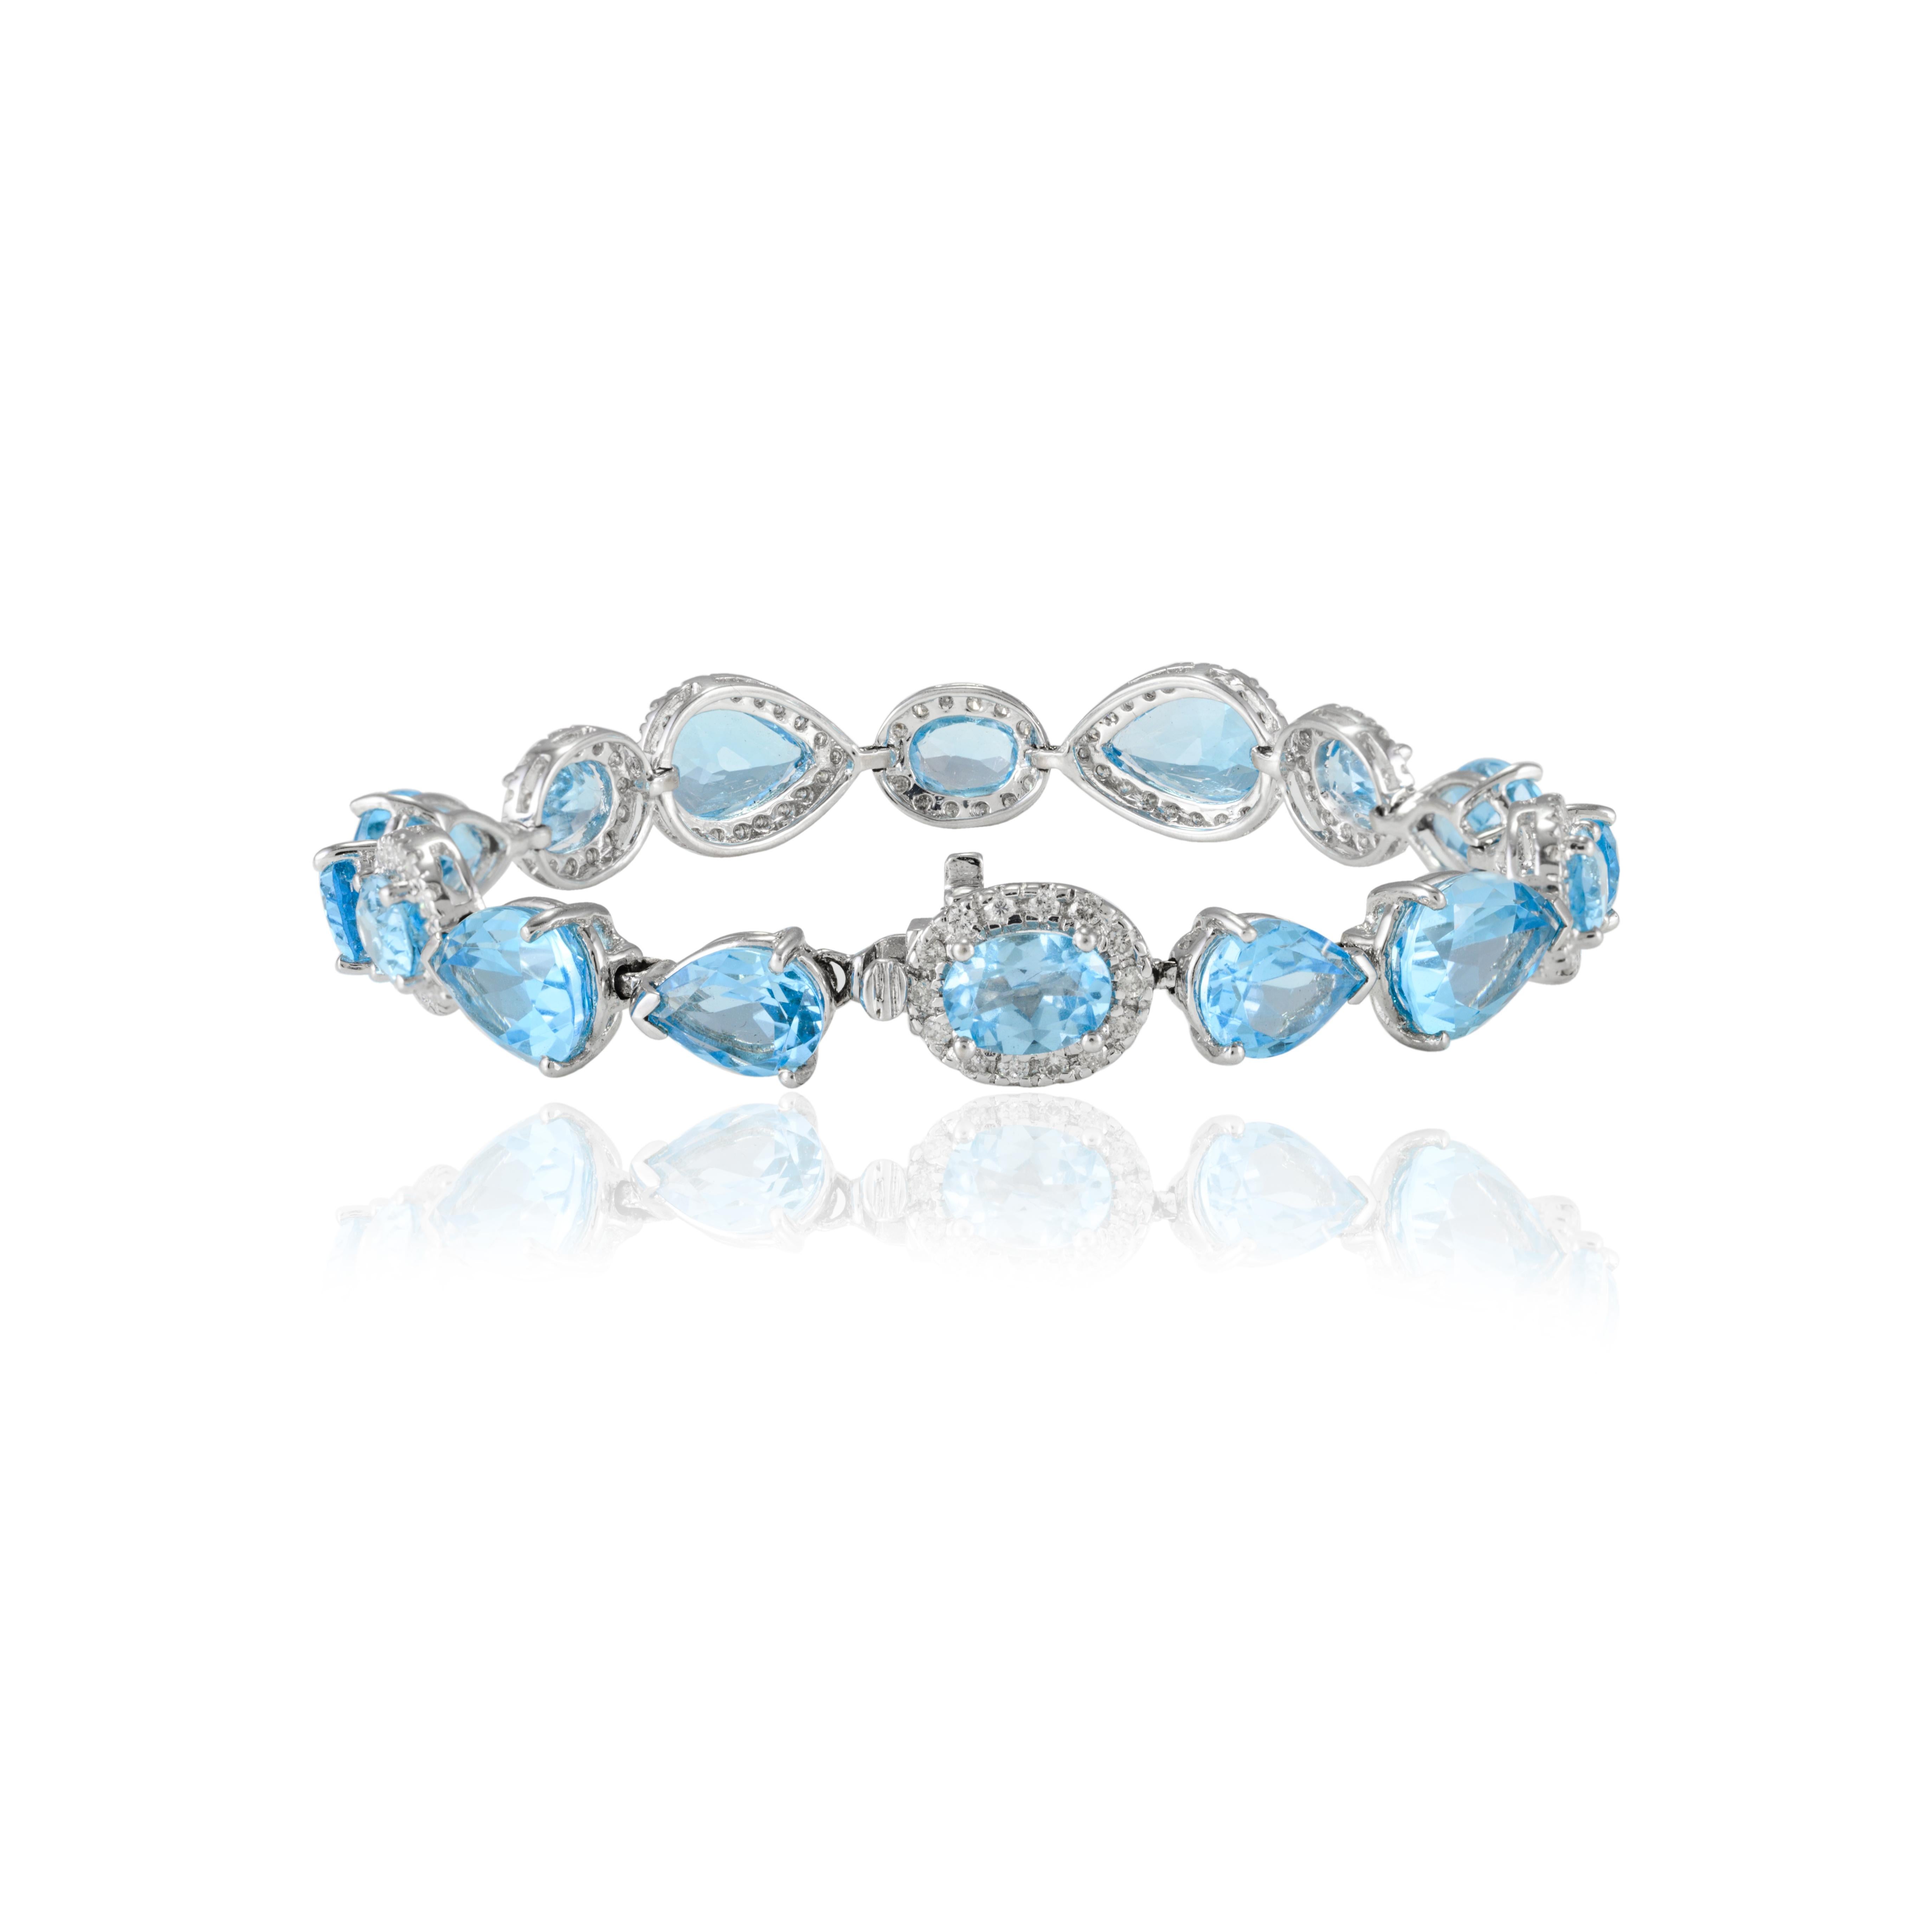 25.92ct Mixed Cut Blue Topaz and Halo Diamond Tennis Bracelet 18k White Gold For Sale 1